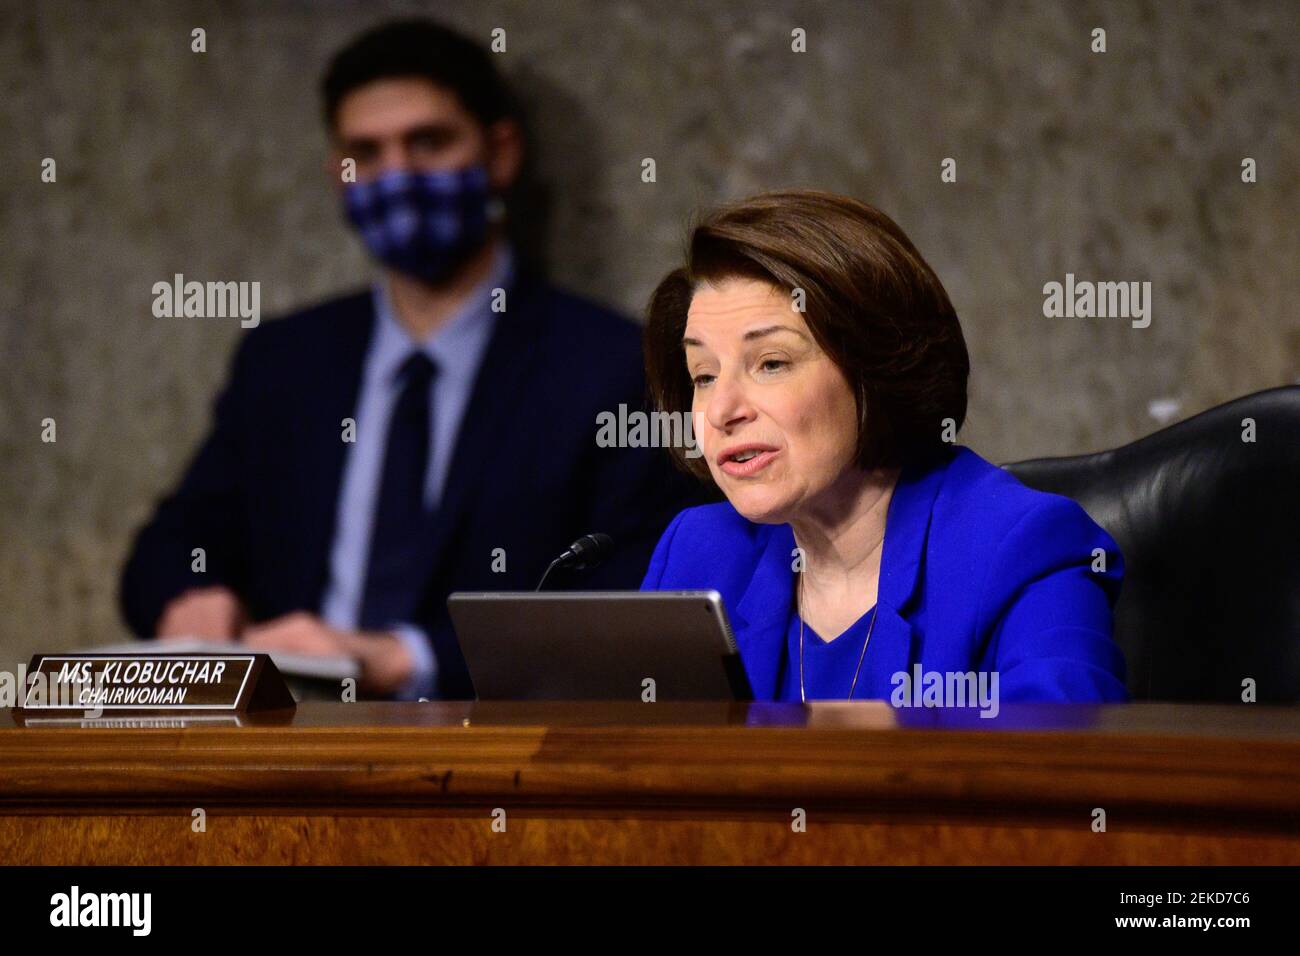 Washington, United States. 23rd Feb, 2021. Chairwoman Amy Klobuchar, D-Minn., speaks during a Senate Homeland Security and Governmental Affairs and Senate Rules and Administration committees joint hearing on Capitol Hill, Washington, DC on Tuesday, February 23, 2021, to examine the January 6th attack on the Capitol. Pool photo by Erin Scott/UPI Credit: UPI/Alamy Live News Stock Photo